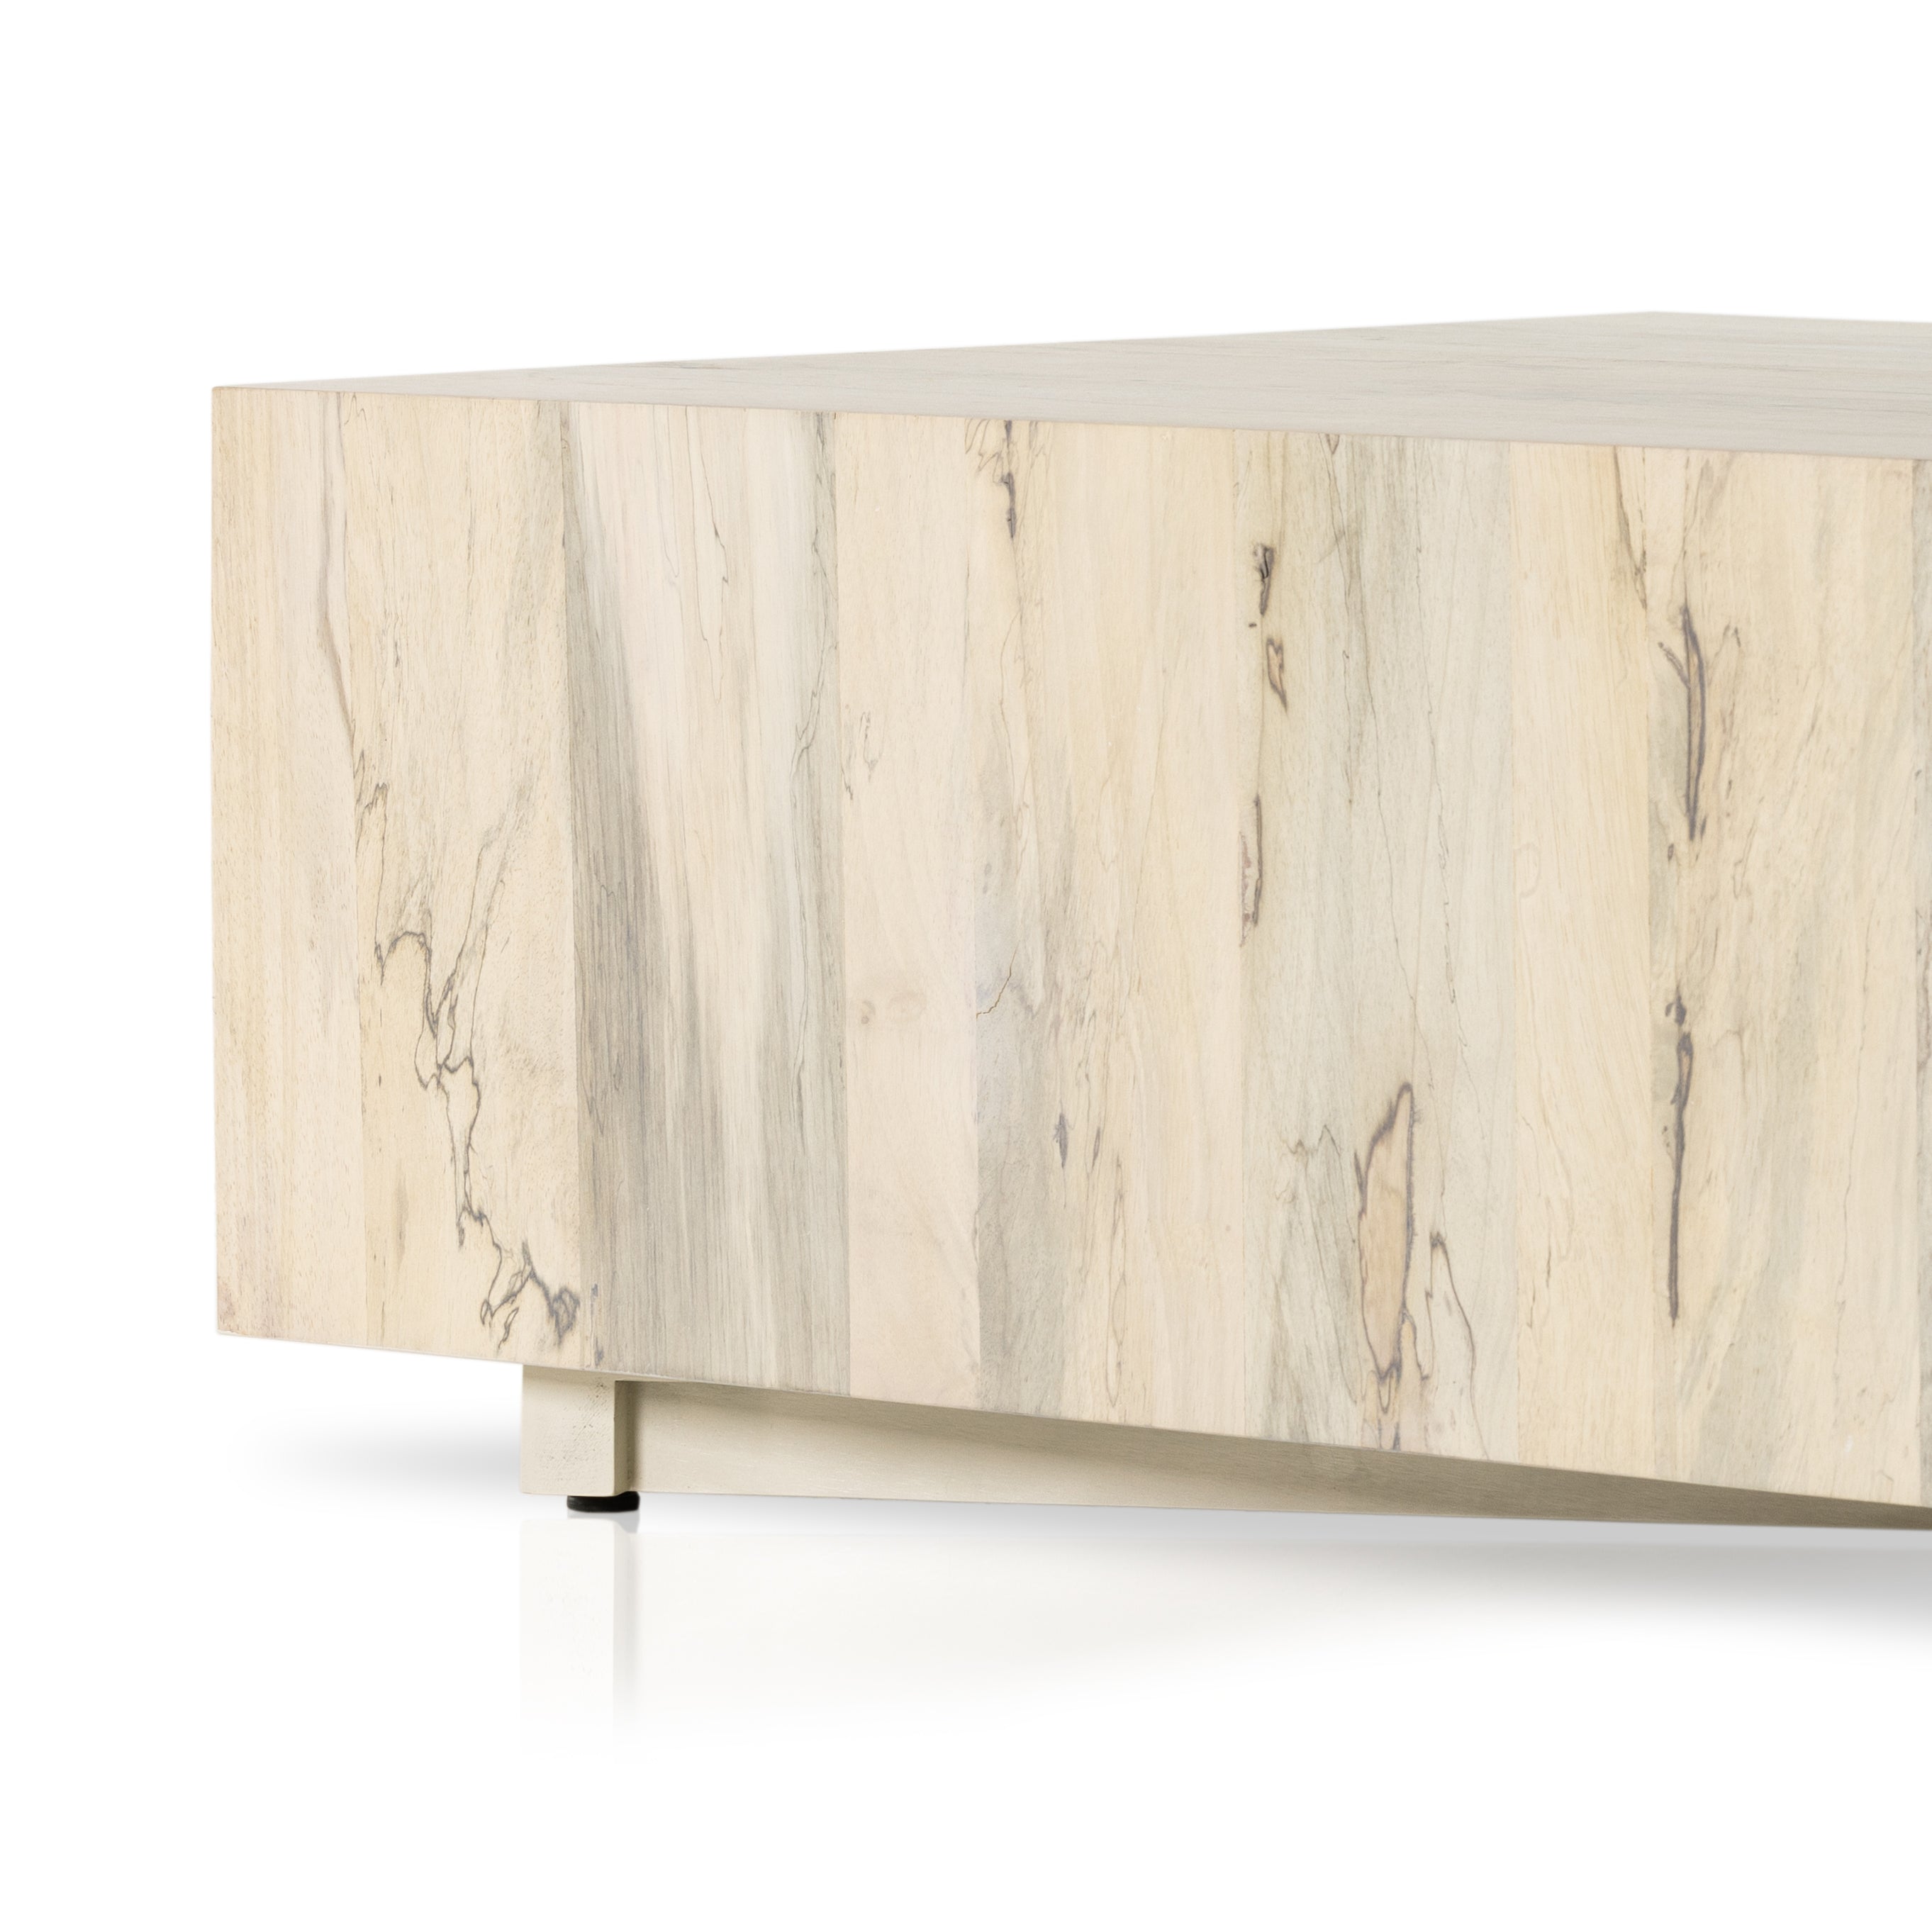 Stunning forces of nature, captured in a coffee table. Spalted primavera wood is hand-shaped into a rectangular silhouette and finished in a white hue. Reflective of woods' natural character, a slight color variance is possible from piece to piece. Amethyst Home provides interior design, new construction, custom furniture, and area rugs in the Park City metro area.